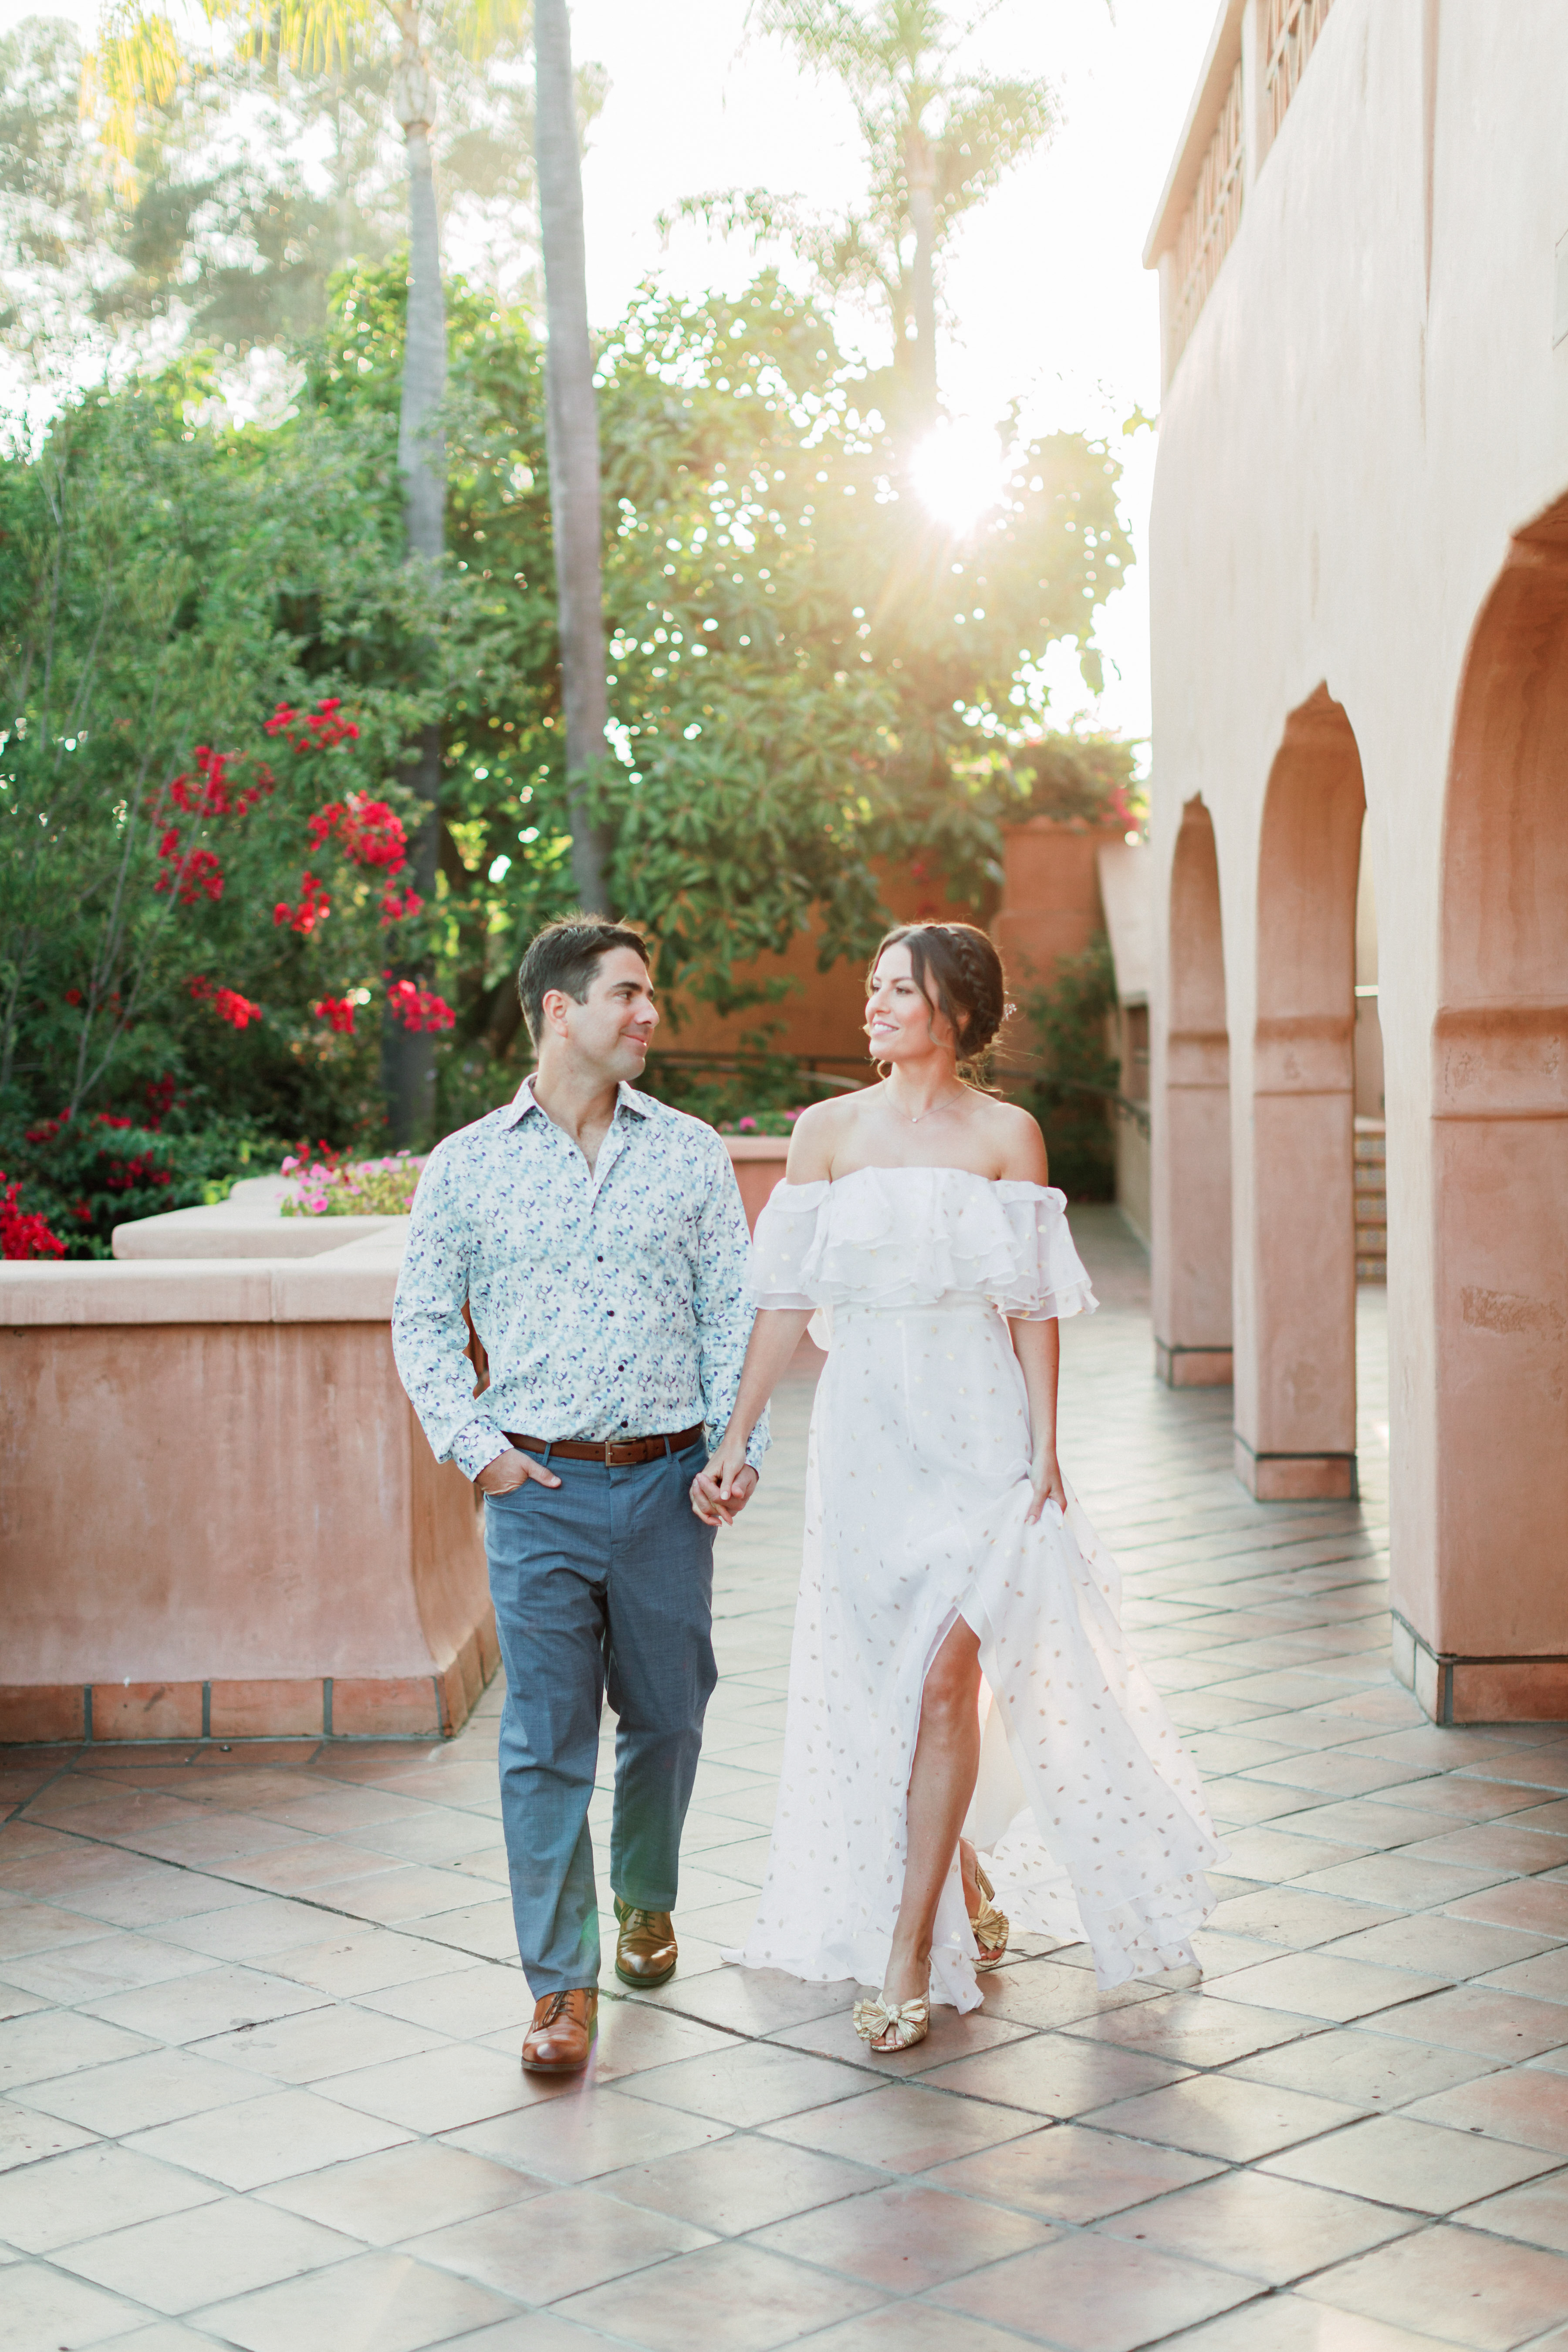 Jeremy and Bronte's whimsical wedding weekend at Rancho La Valencia